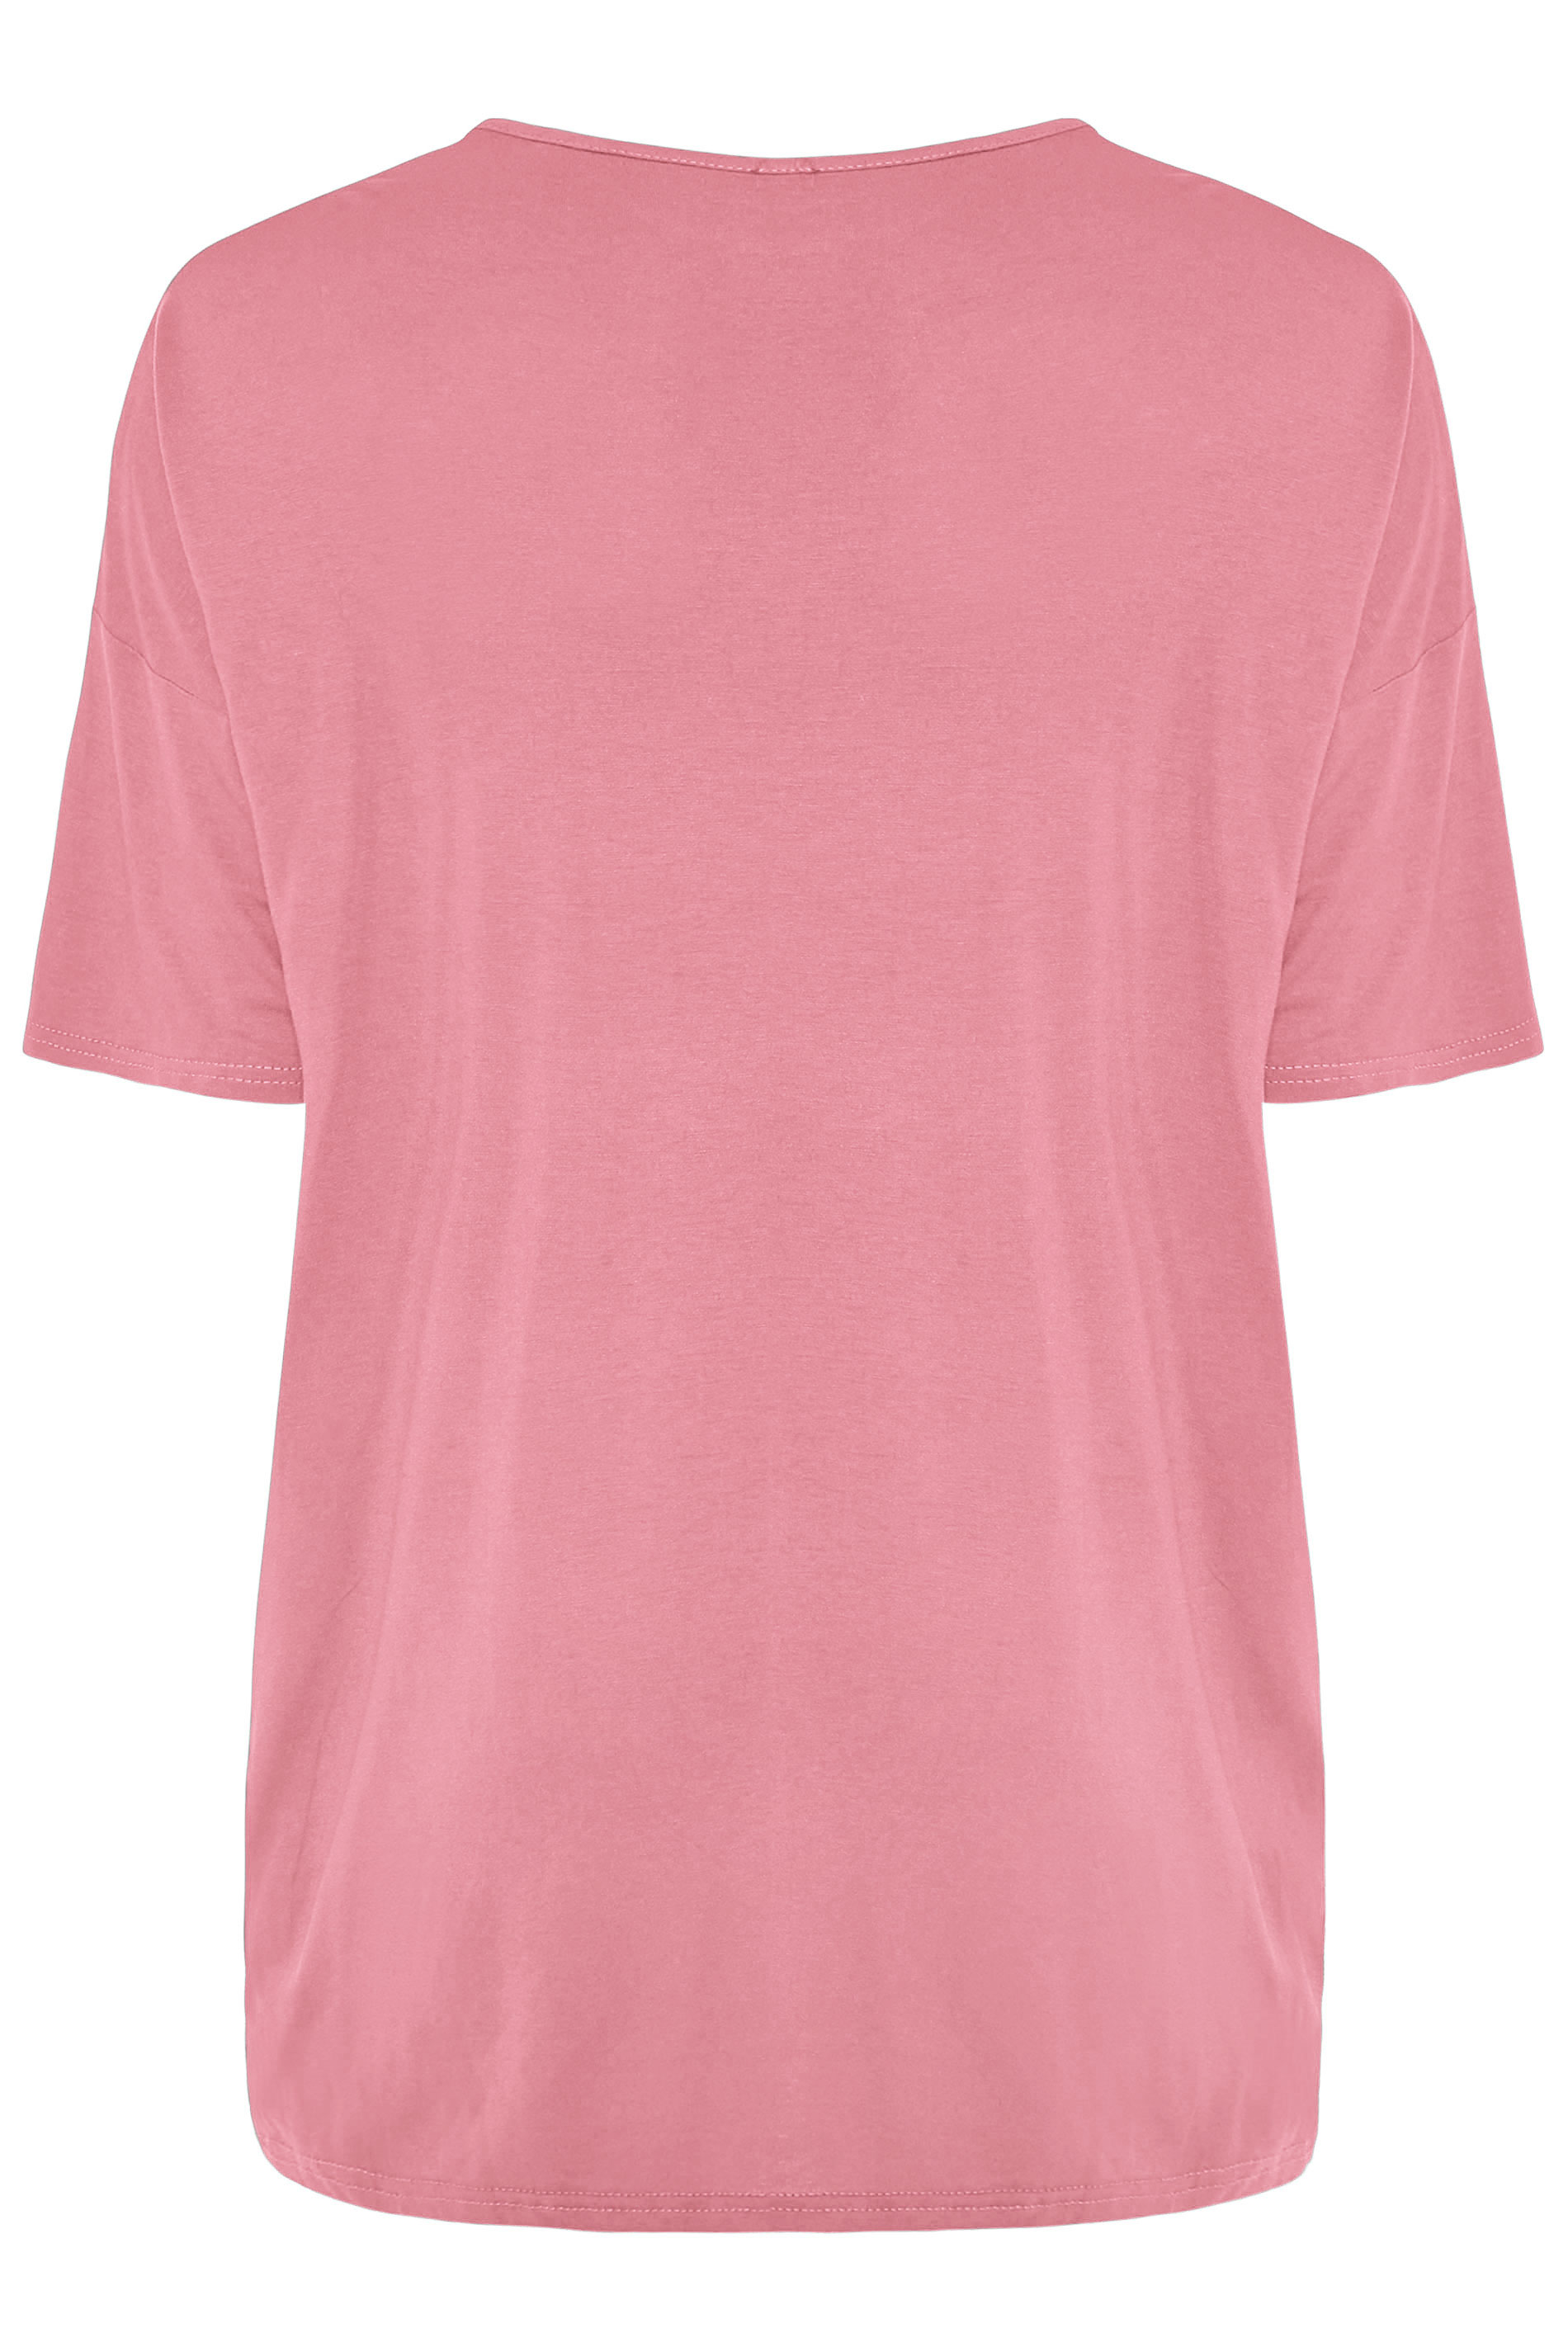 Blush Pink Jersey Oversized T-Shirt | Yours Clothing